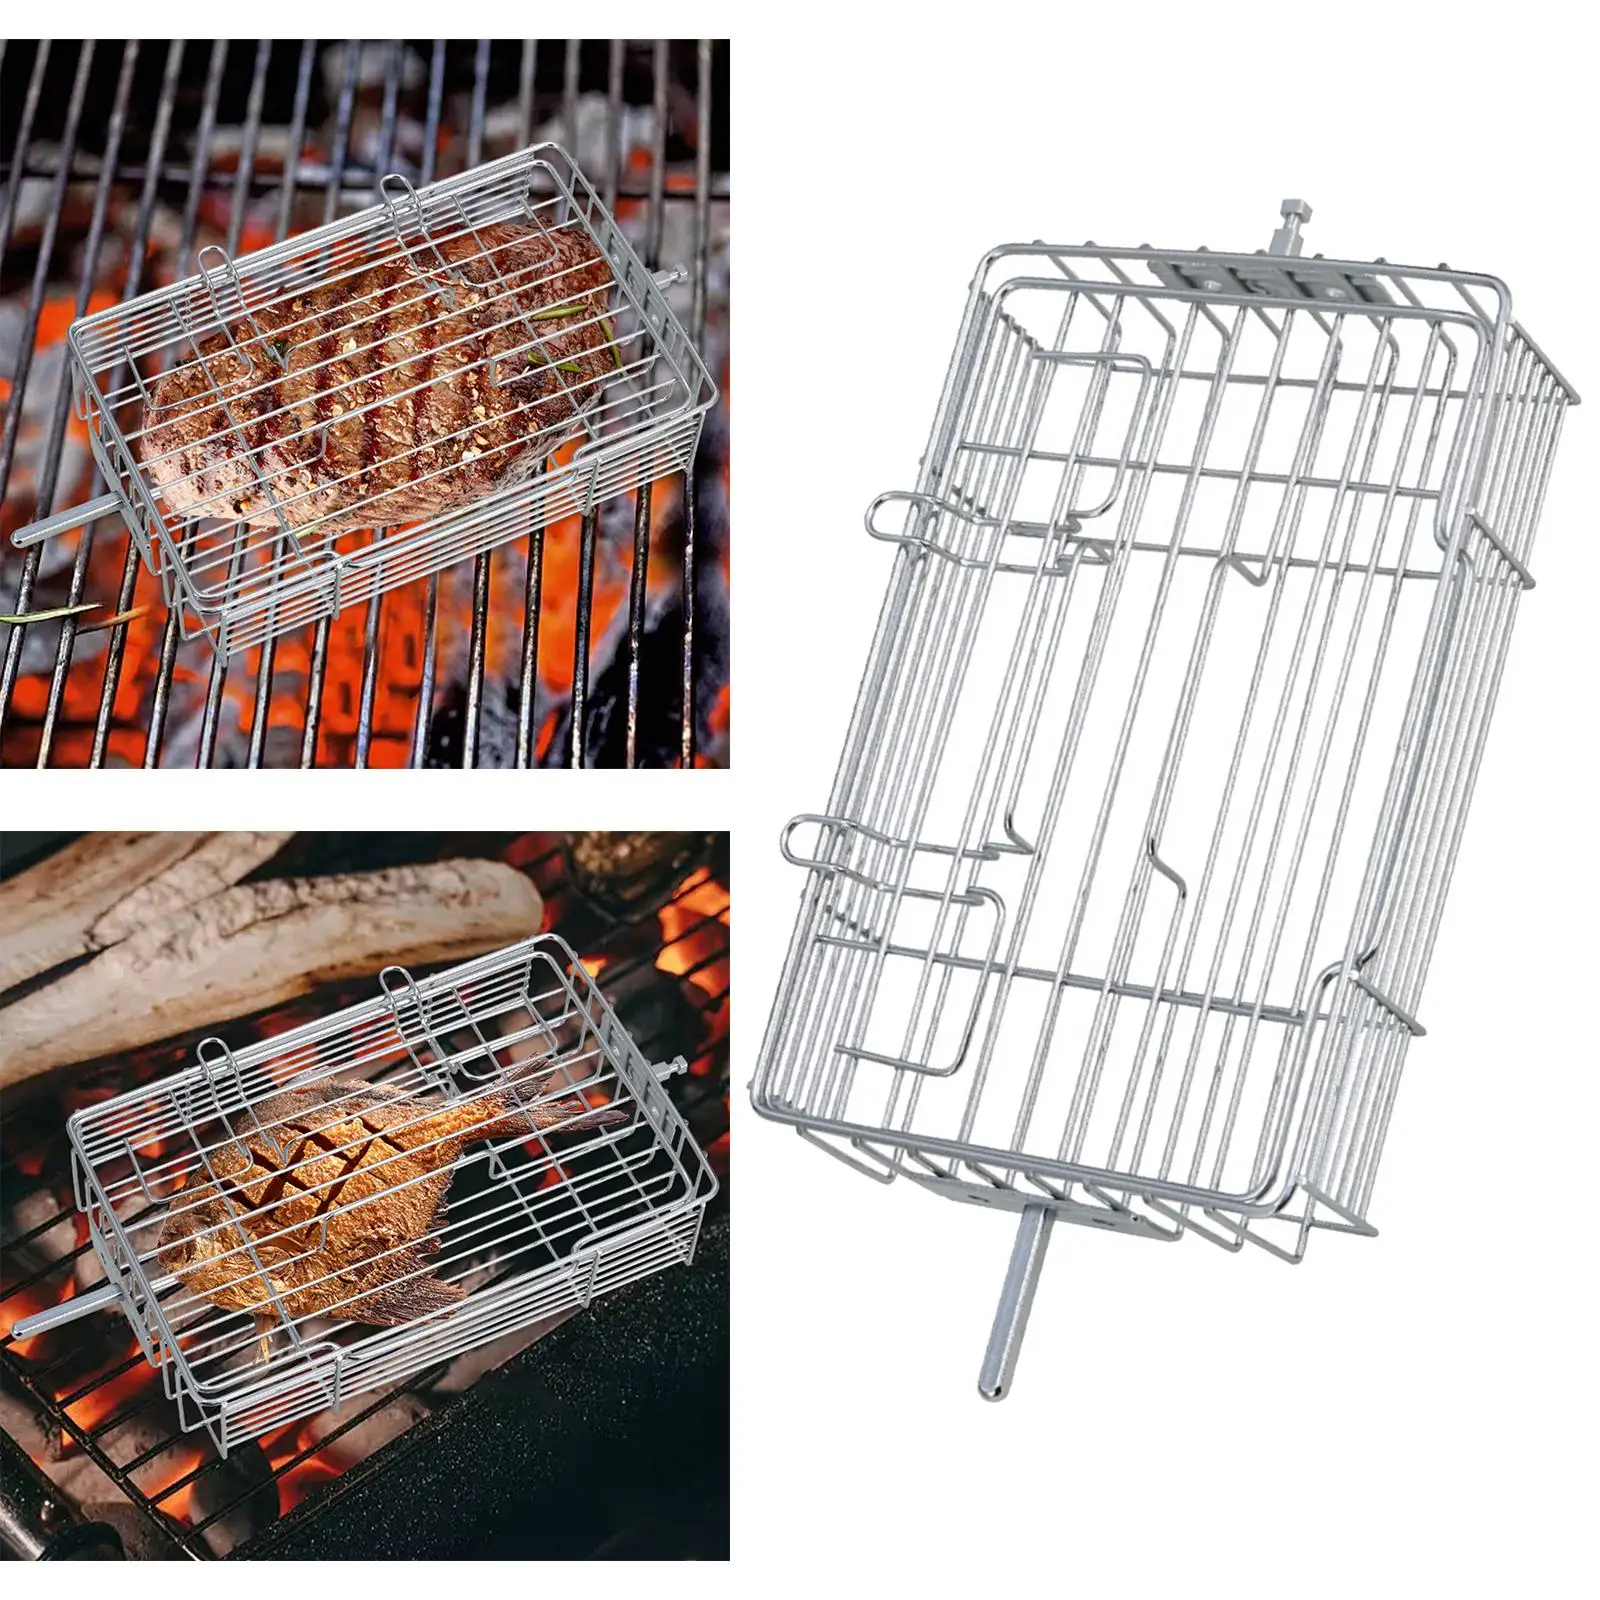 Air Fryer Grill Rack Barbecue Empty Stainless Steel High Chassis Basket Fried Shelf Dehydrator Rack for AF506E AF506M Oven